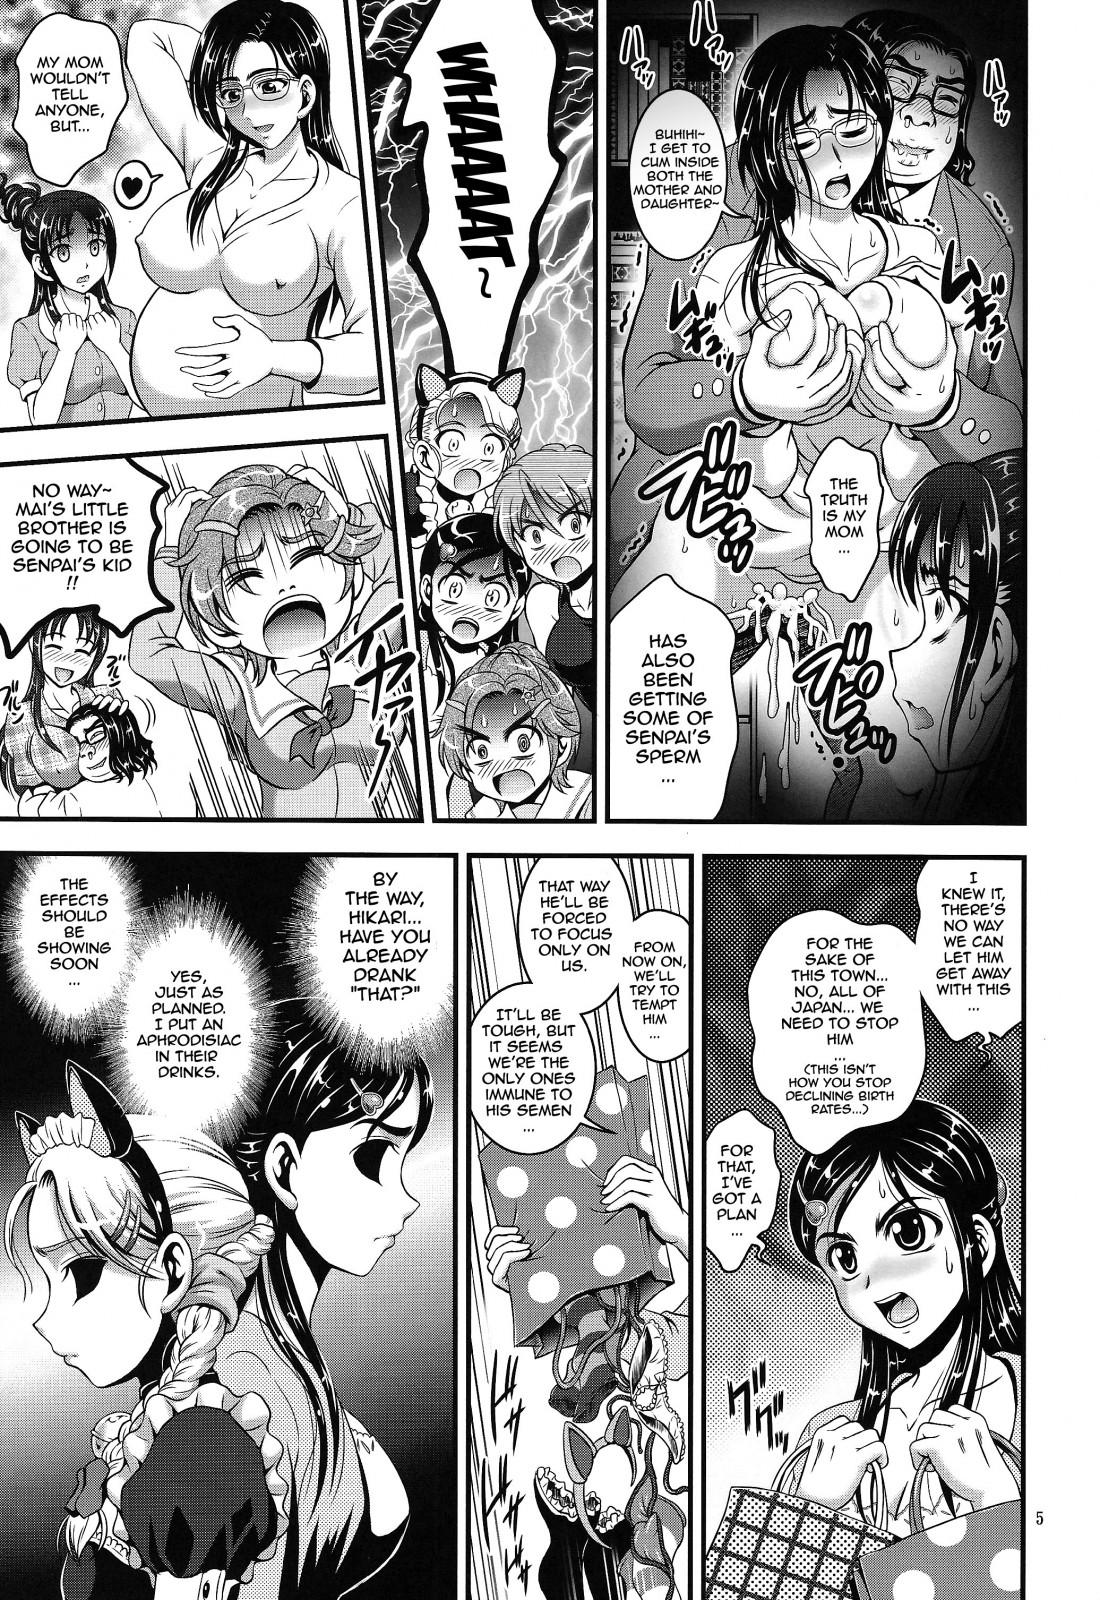 Cumming Ore Yome Ranking 1 | My Bride Ranking 1 - Pretty cure Gayporn - Page 6